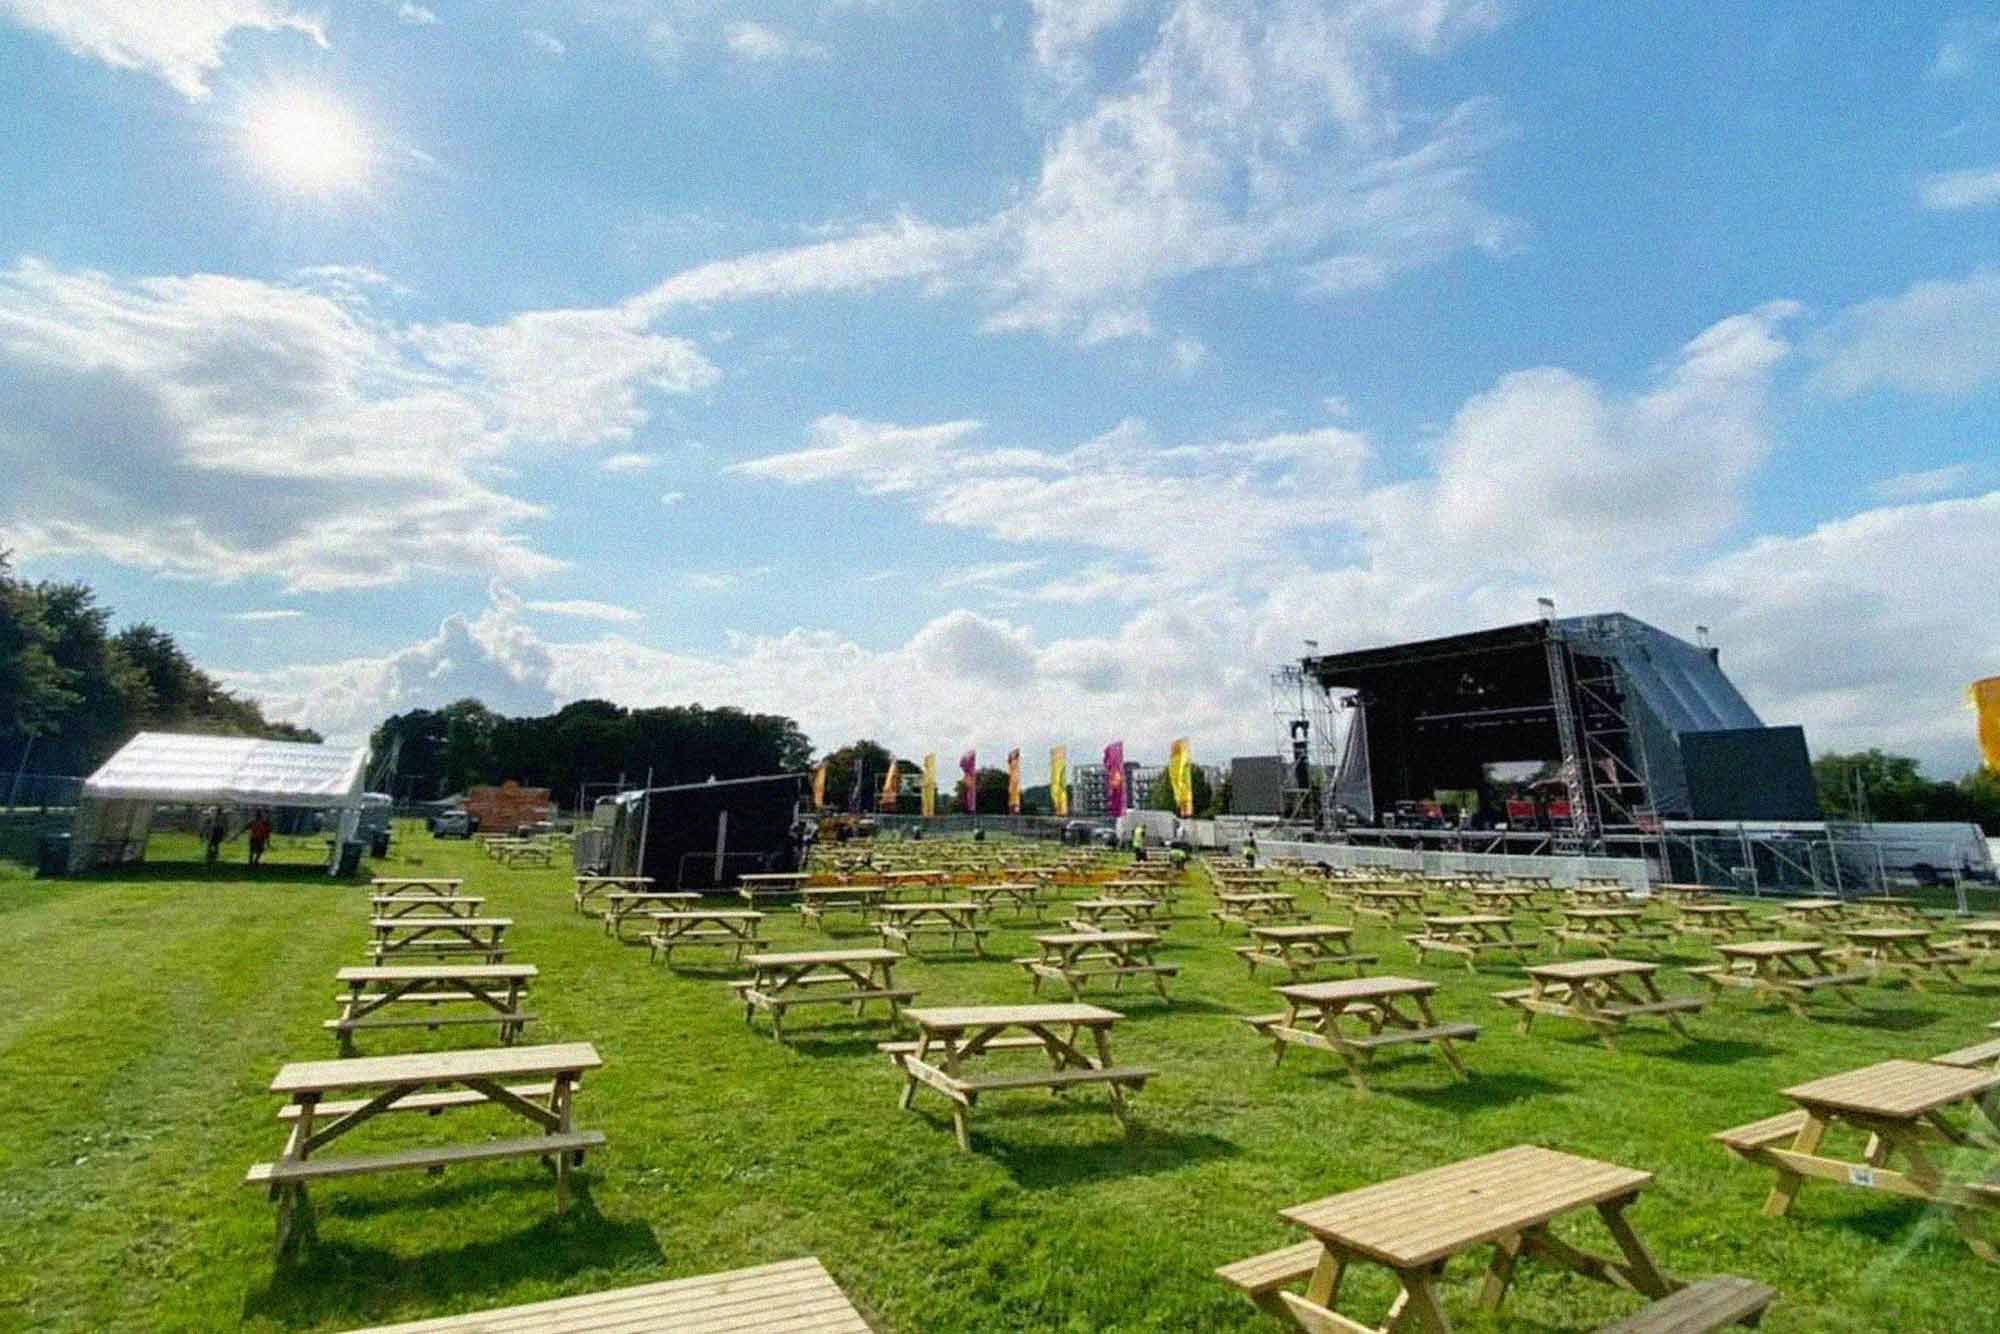 Photograph of a concert space set up in the meadows on a sunny day. There are several rows of picnic tables in front of a large sound stage.